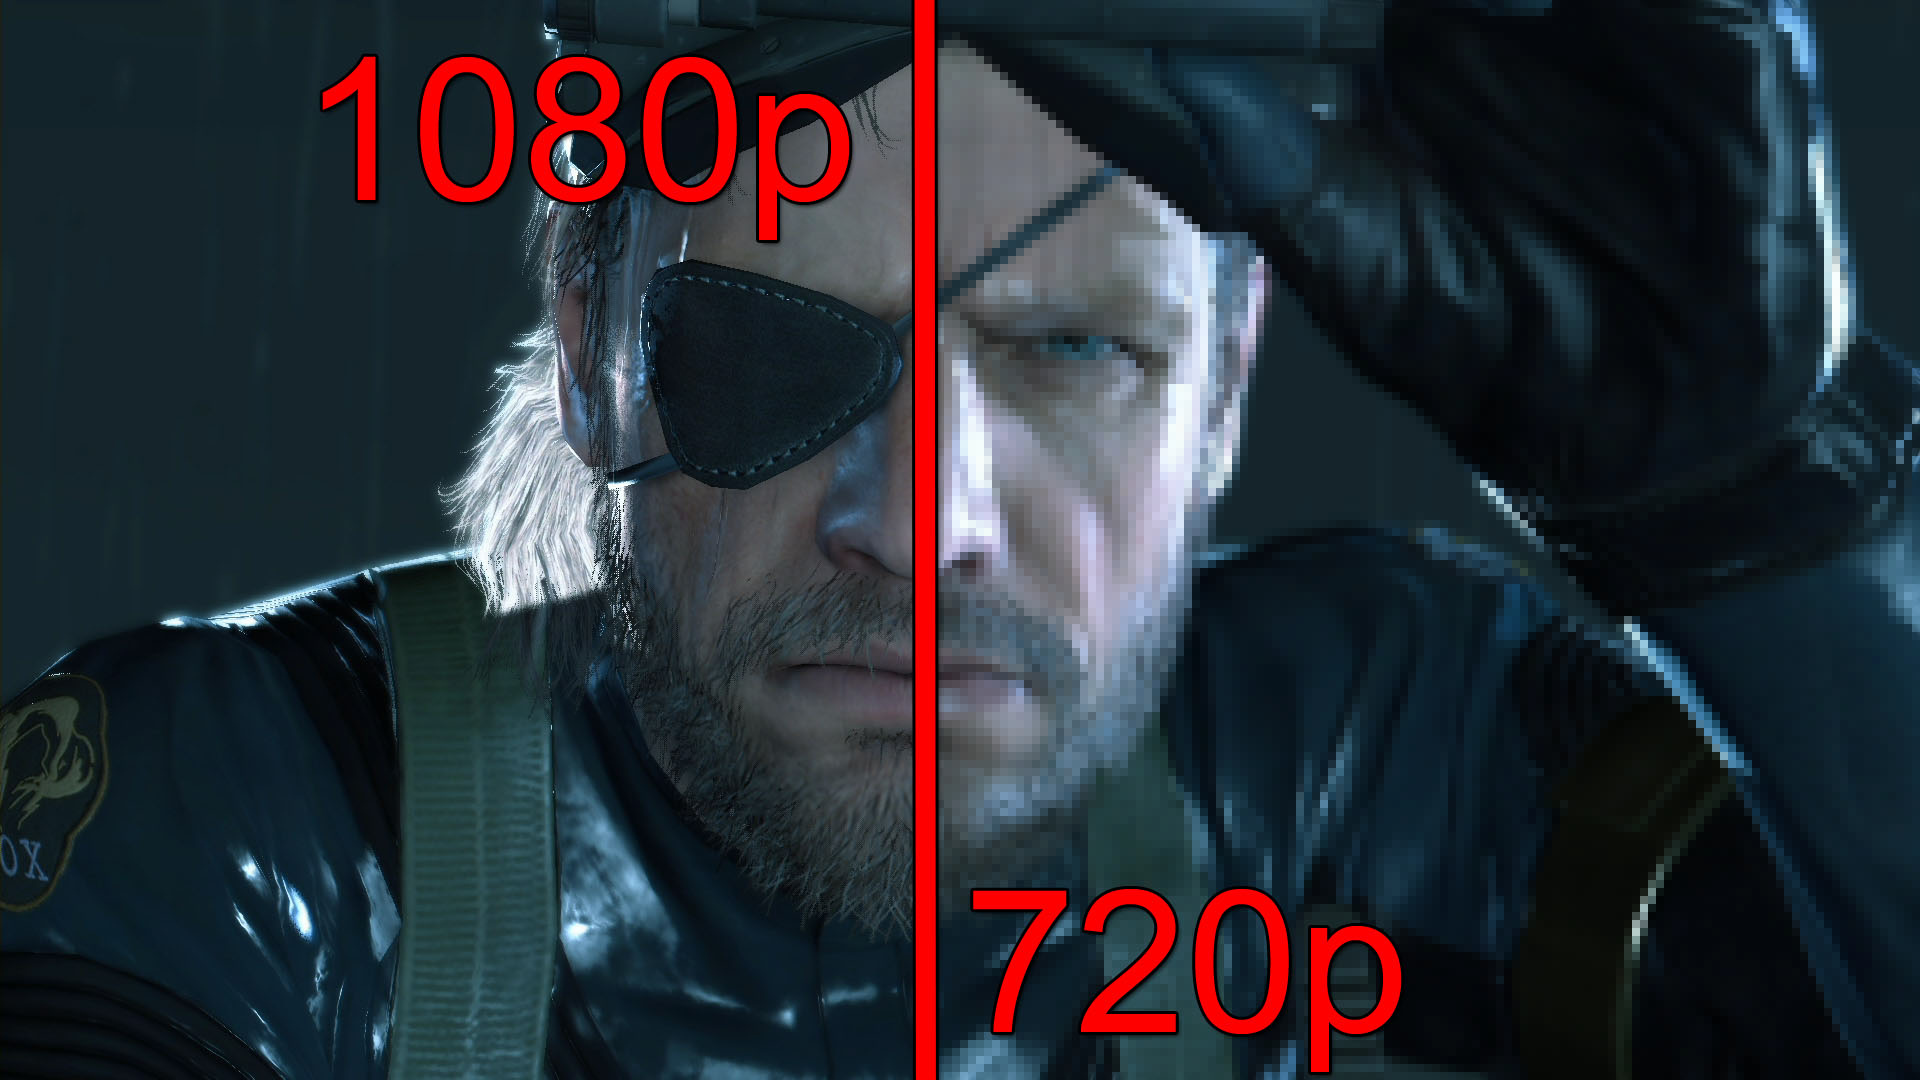 Metal Gear Solid V 1080p Vs 720p Screenshot Parison Will The Old